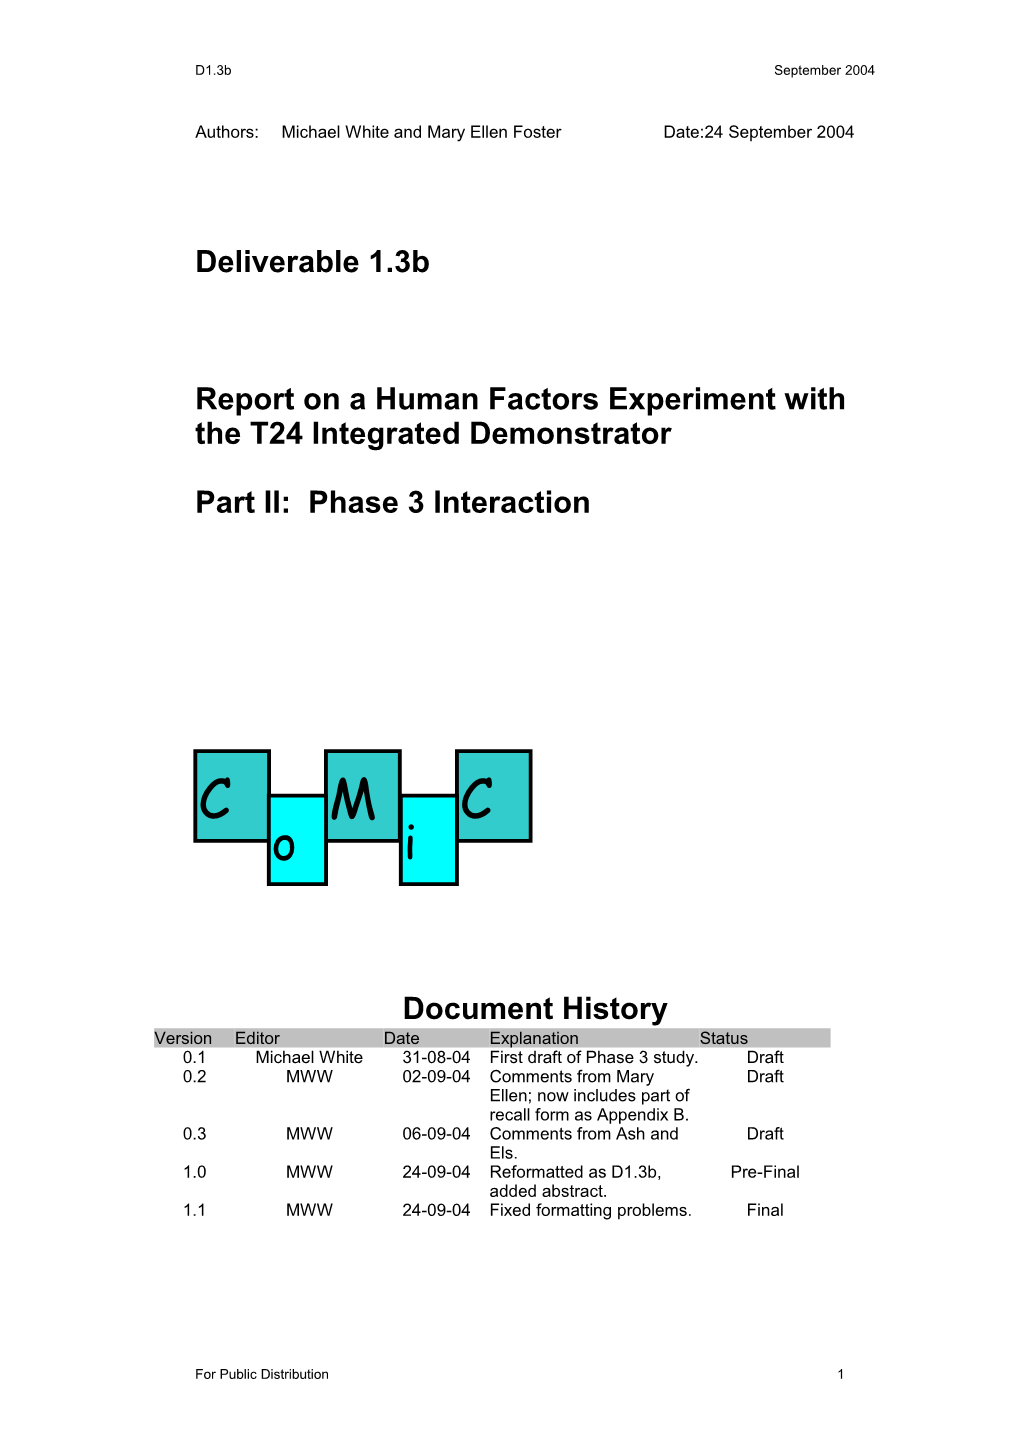 Report on a Human Factors Experiment with the T24 Integrated Demonstrator Part II: Phase